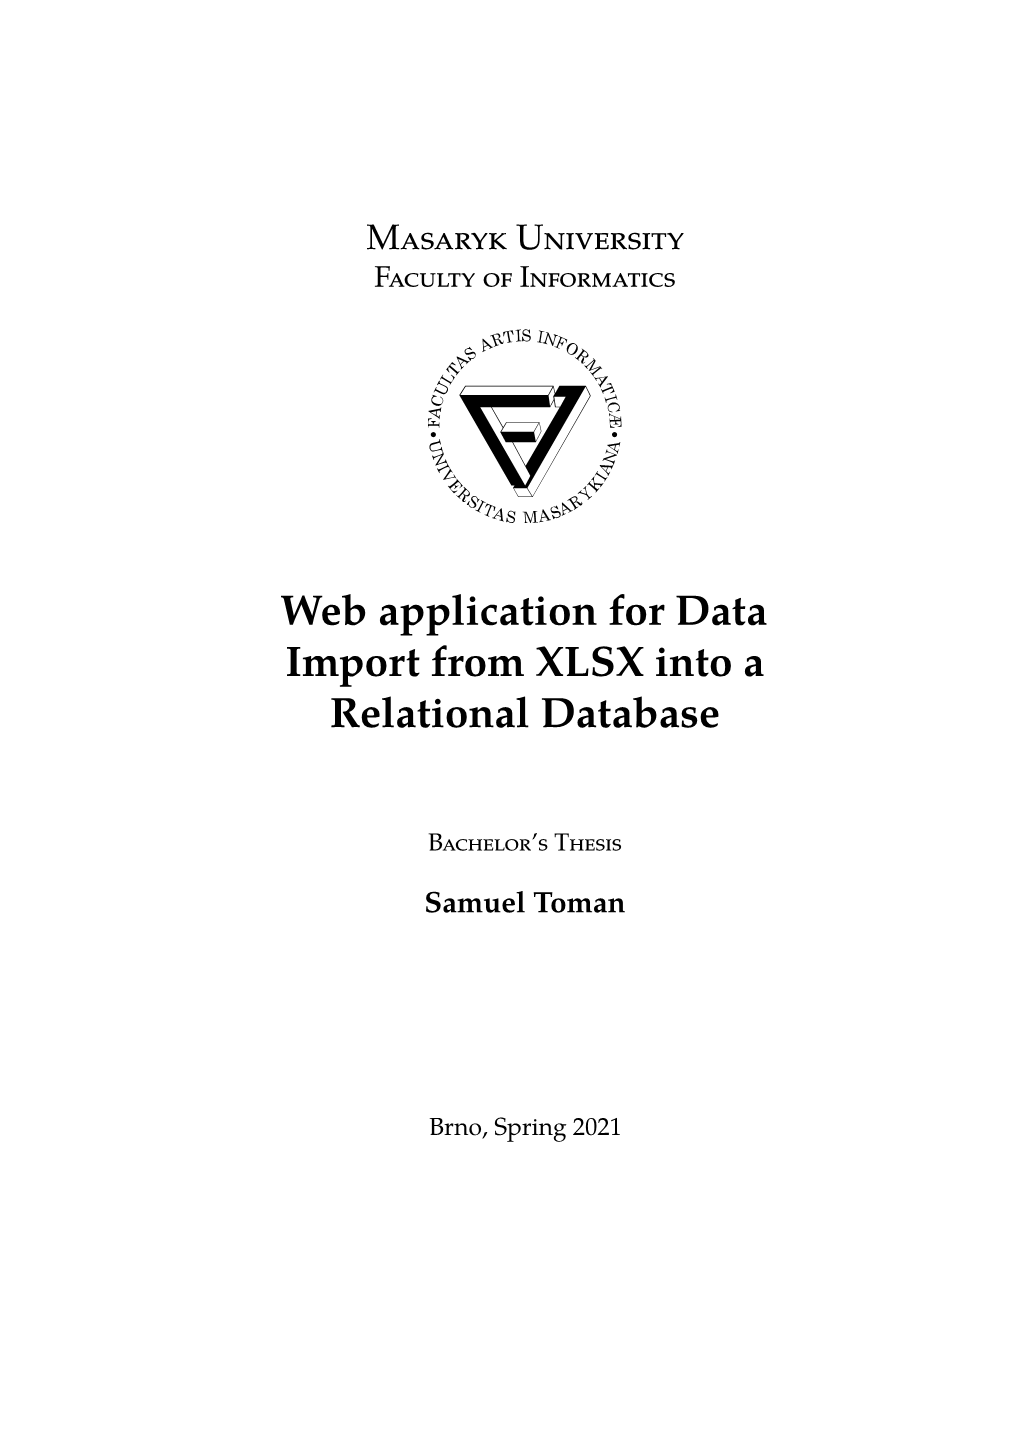 Web Application for Data Import from XLSX Into a Relational Database